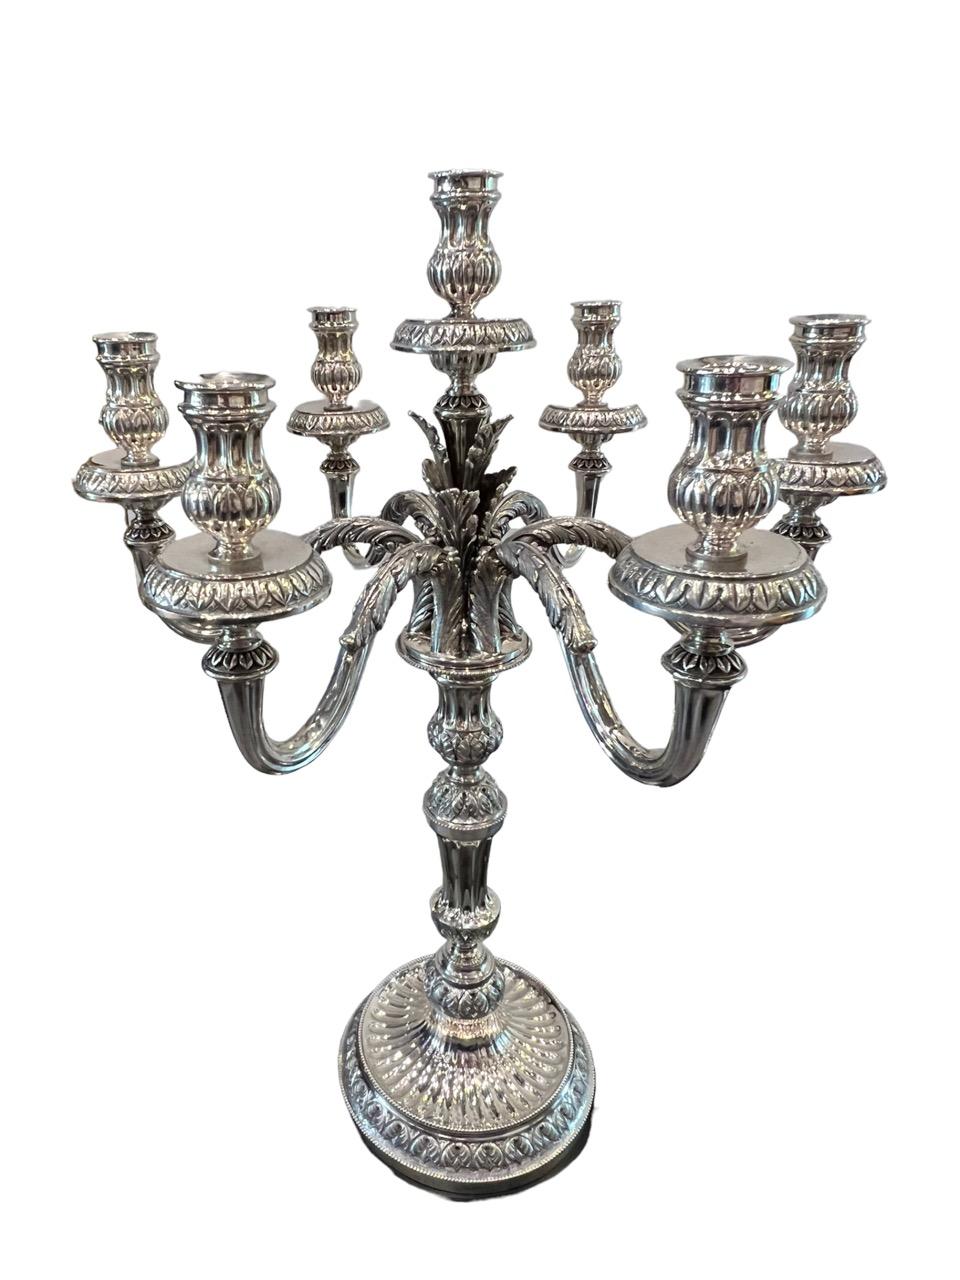 1910 Italian Pair of Sterling Silver Candelabras, Tall and Heavy For Sale 3